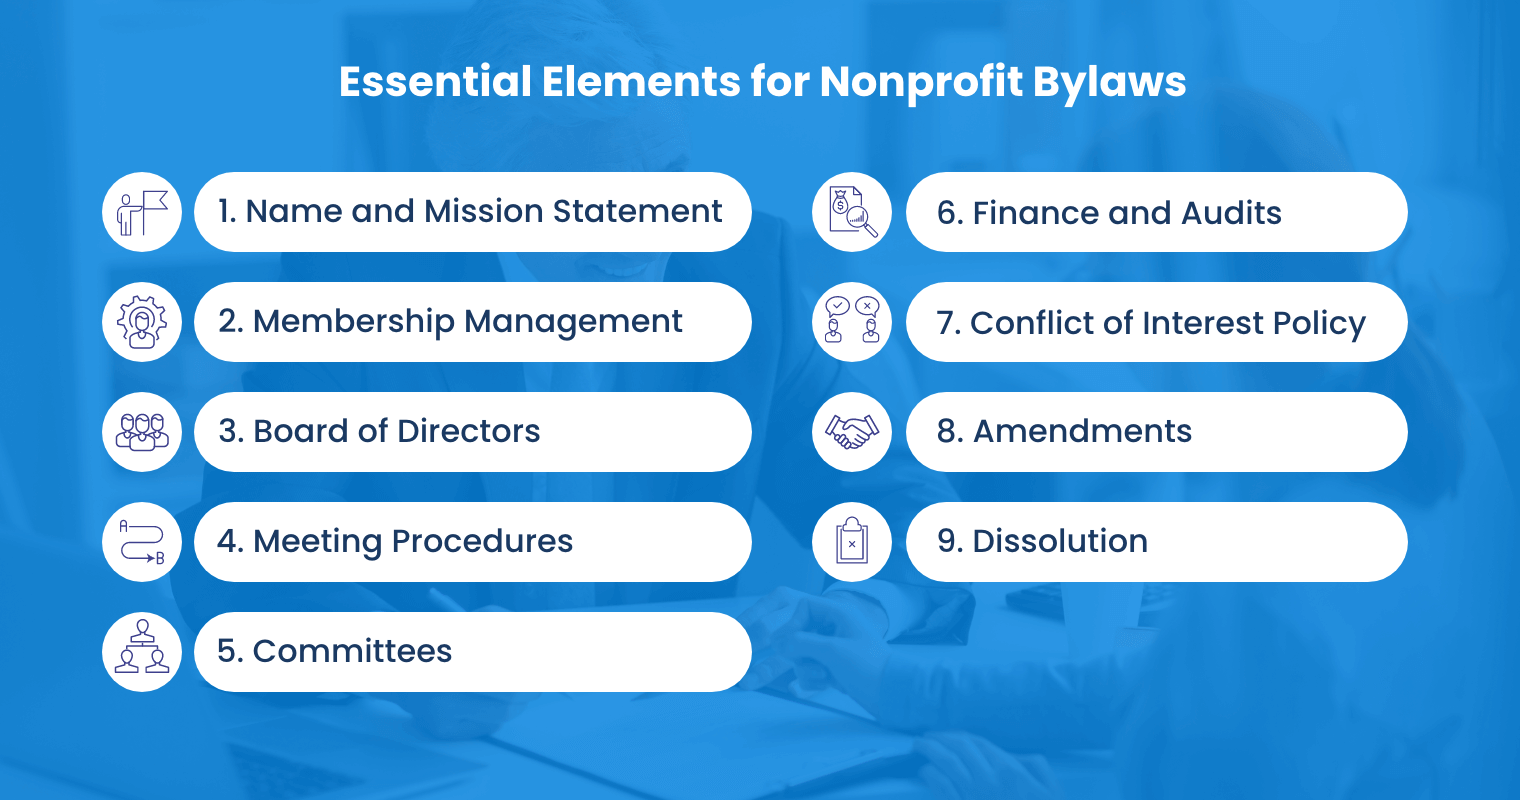 What are the essential elements to include in nonprofit bylaws?